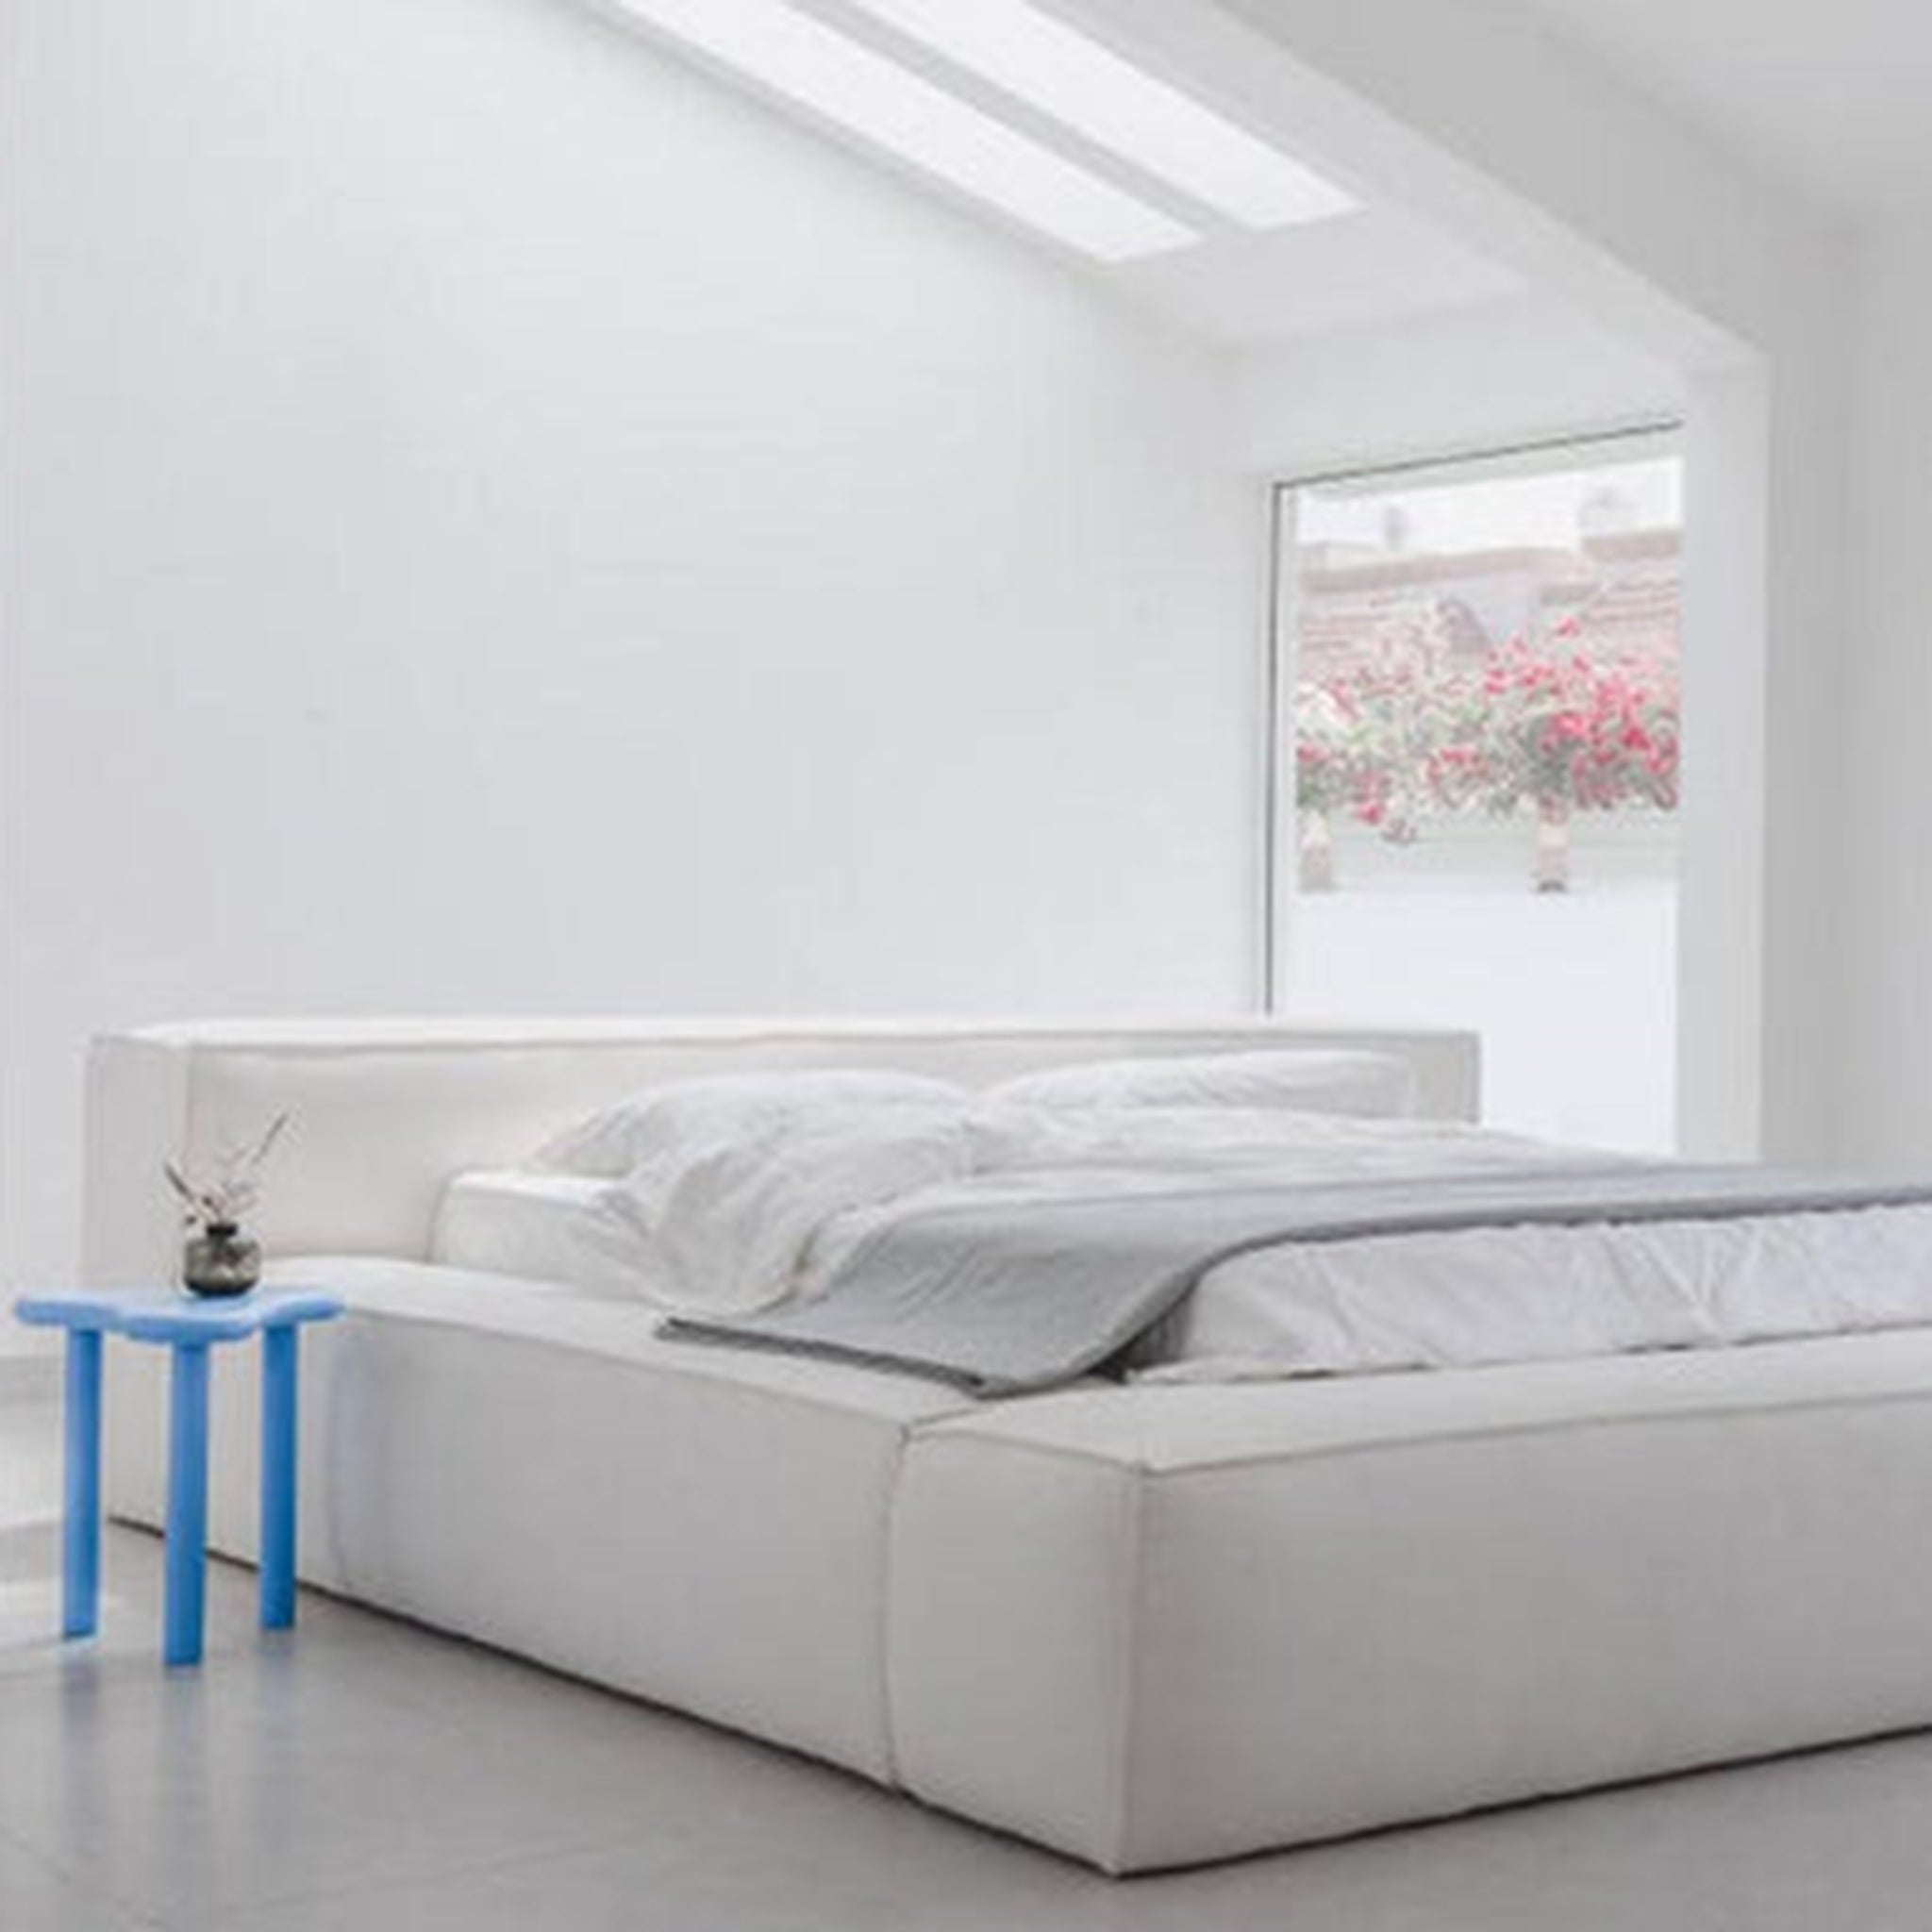 Bright white bed in a minimalist bedroom with a pop of blue. Clean and airy sleeping space.